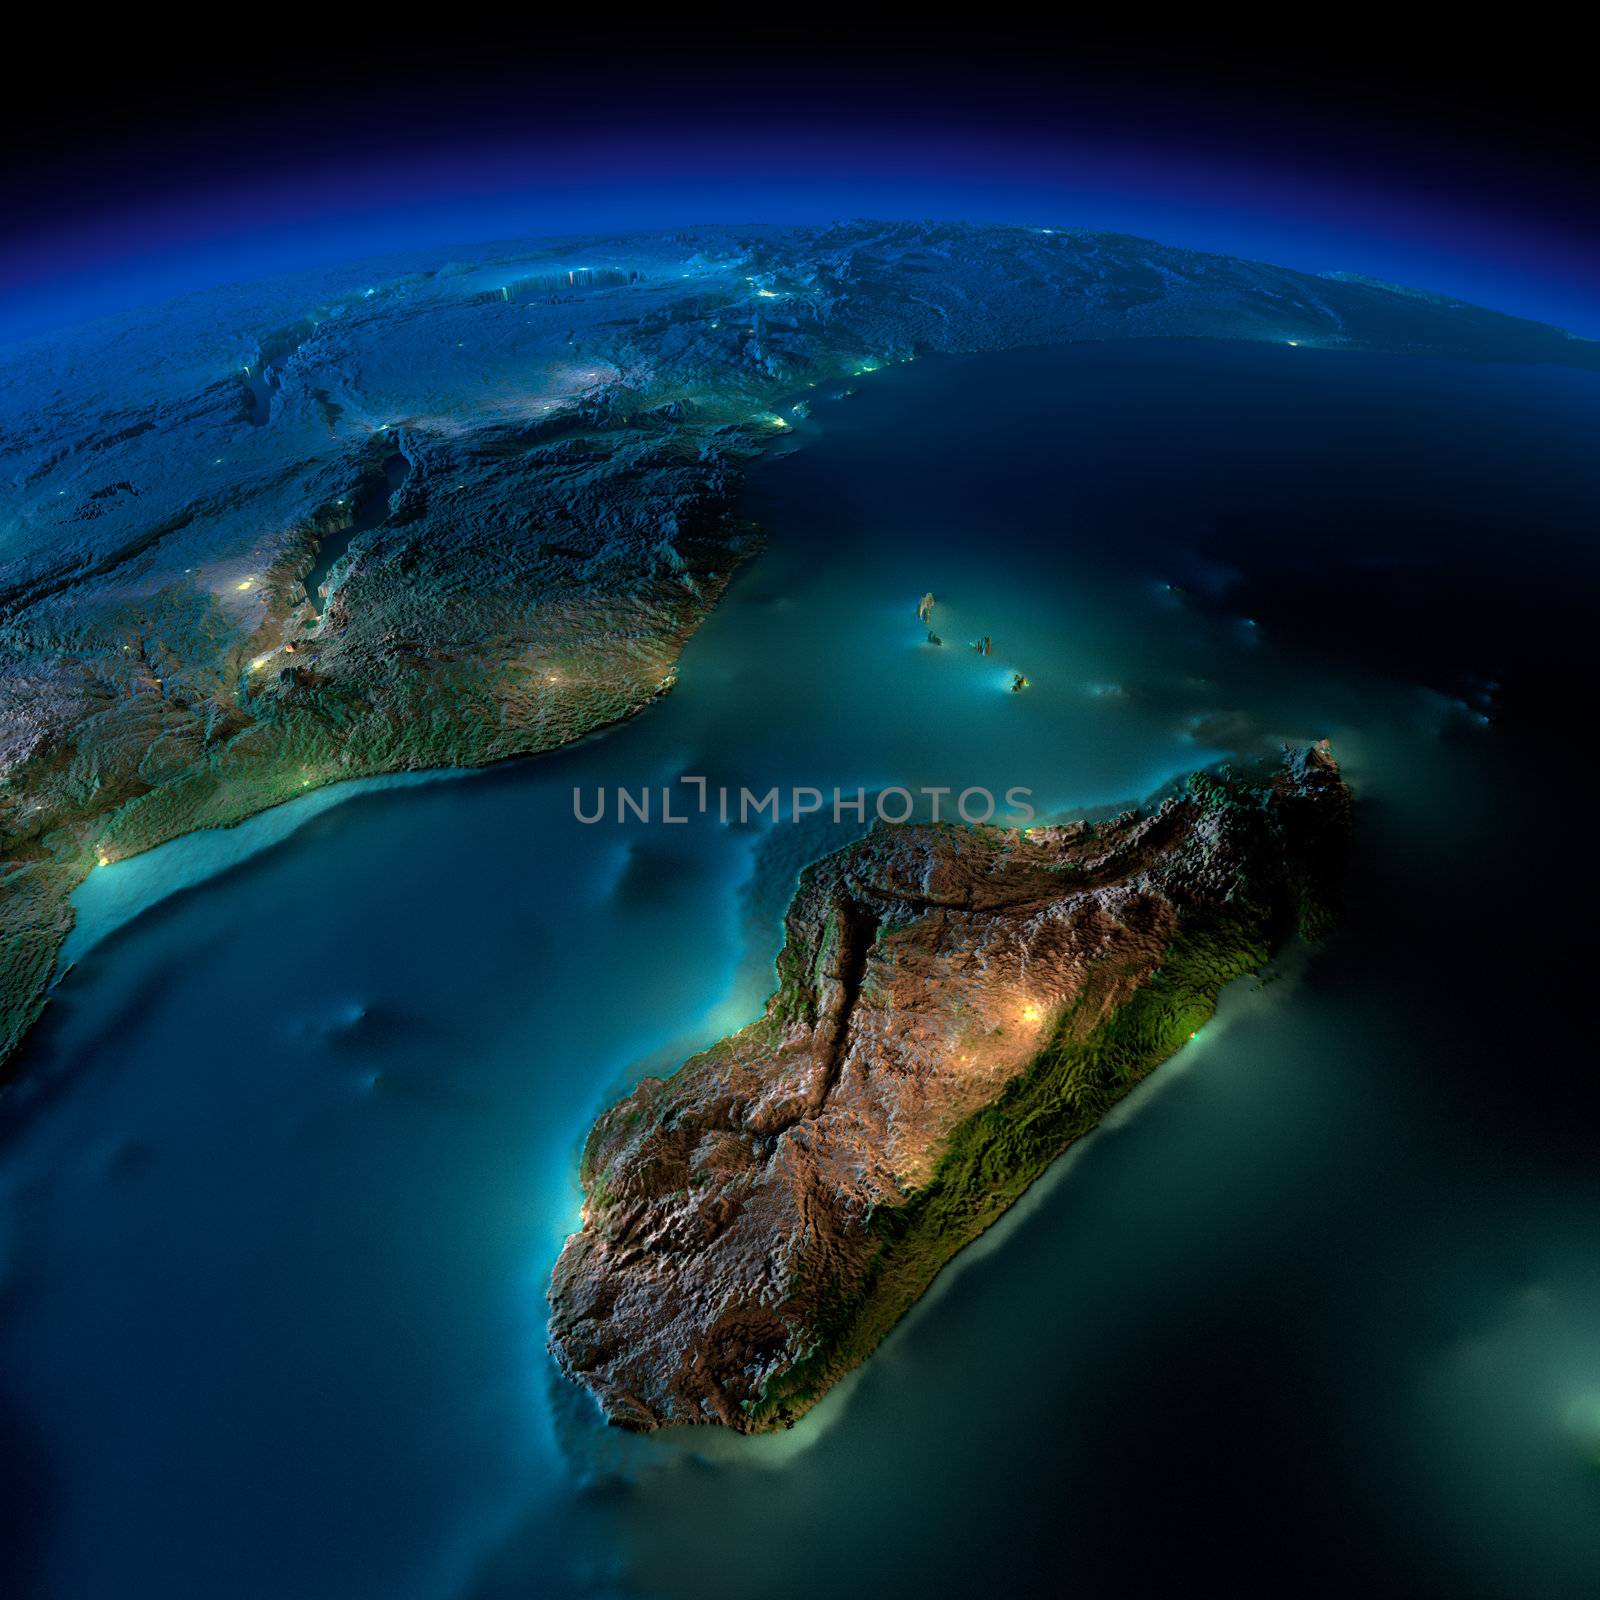 Night Earth. A piece of Africa - Mozambique and Madagascar by Antartis